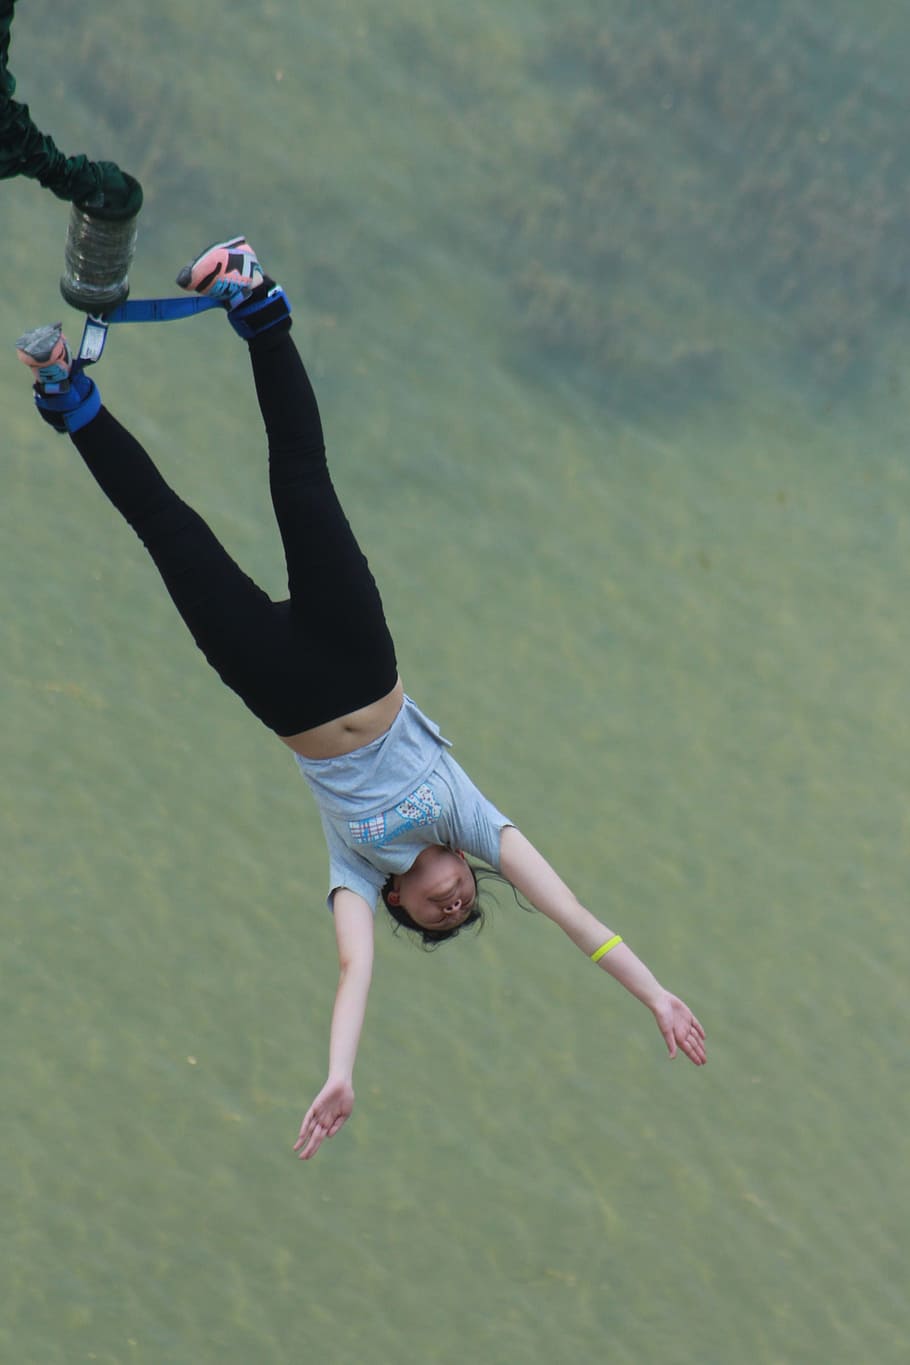 bungee jumping, brave, one person, lifestyles, leisure activity